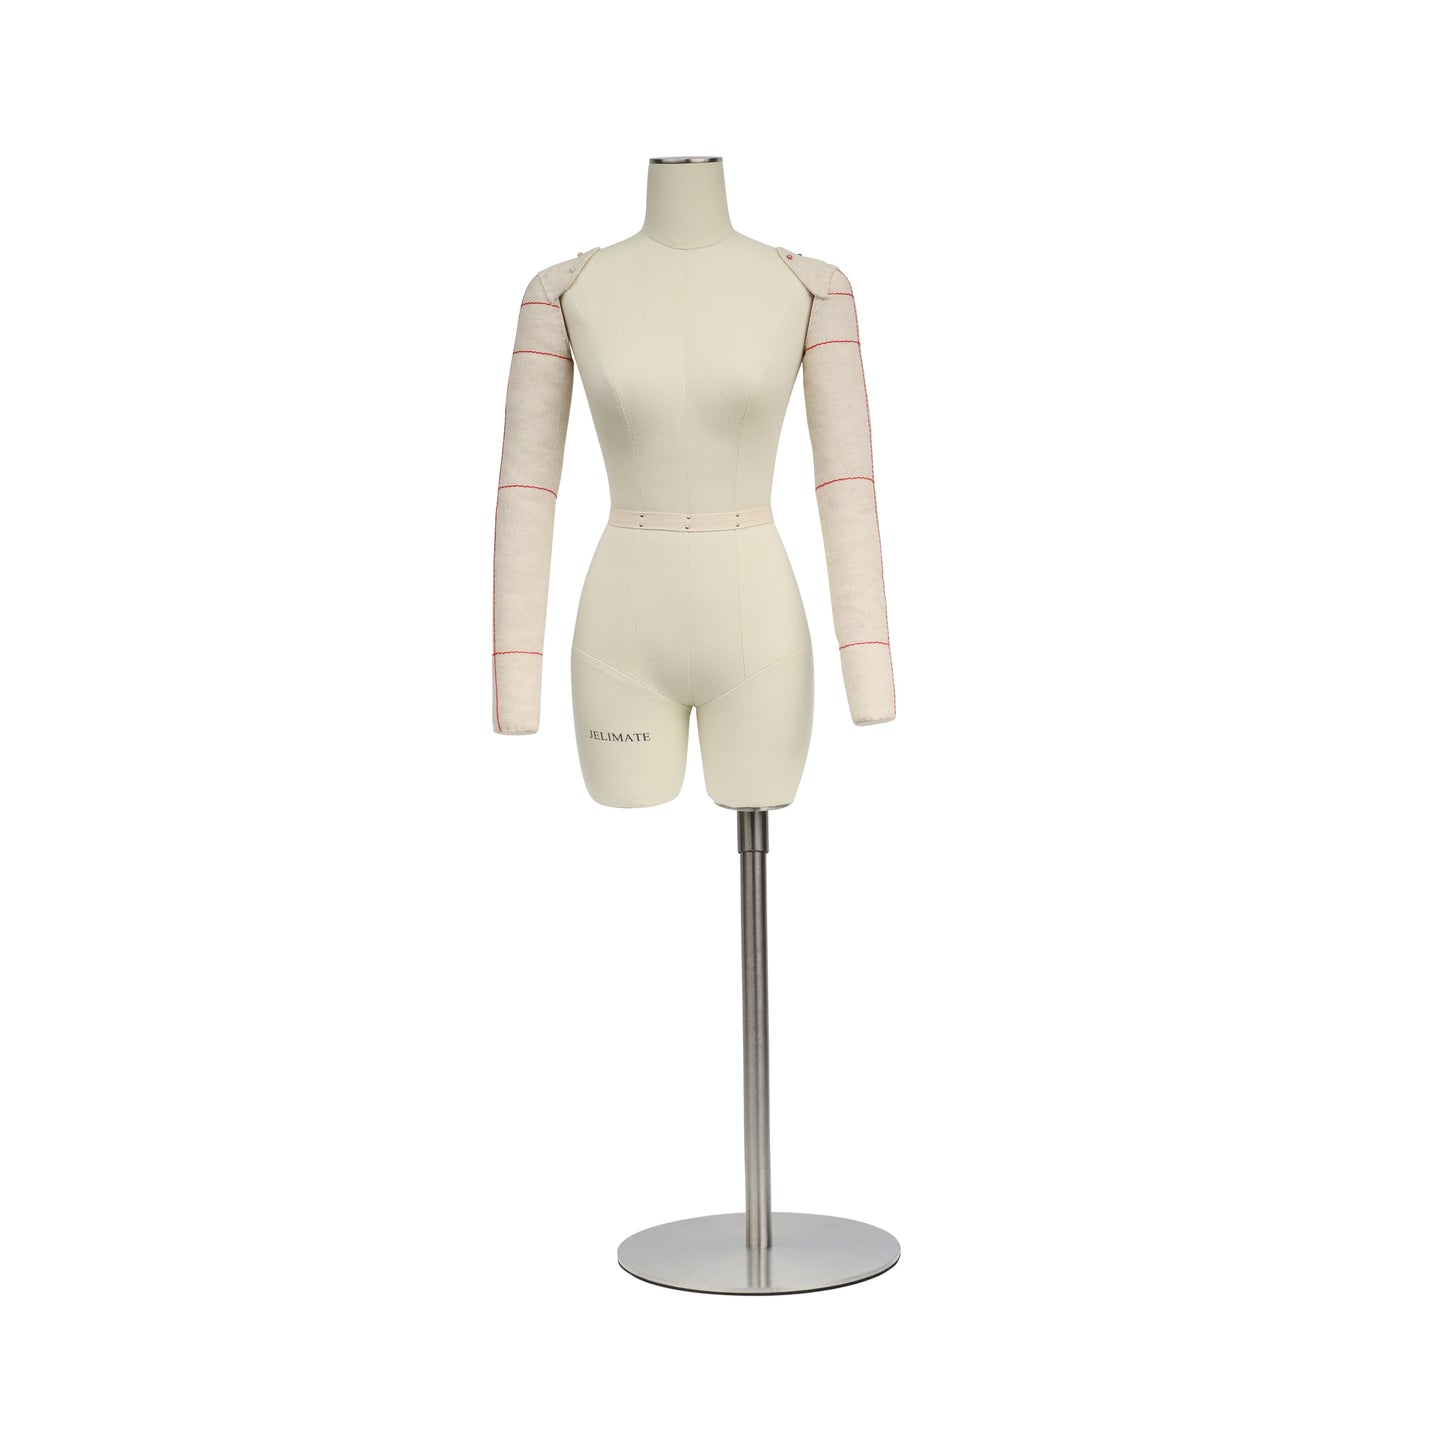 JMSIZE4 Half Scale Female Dress Form For Pattern Making,1/2 Scale Miniature Sewing Mannequin for Women,Mini Tailor Mannequin for Fashion Designer Fashion School Draping Mannequin